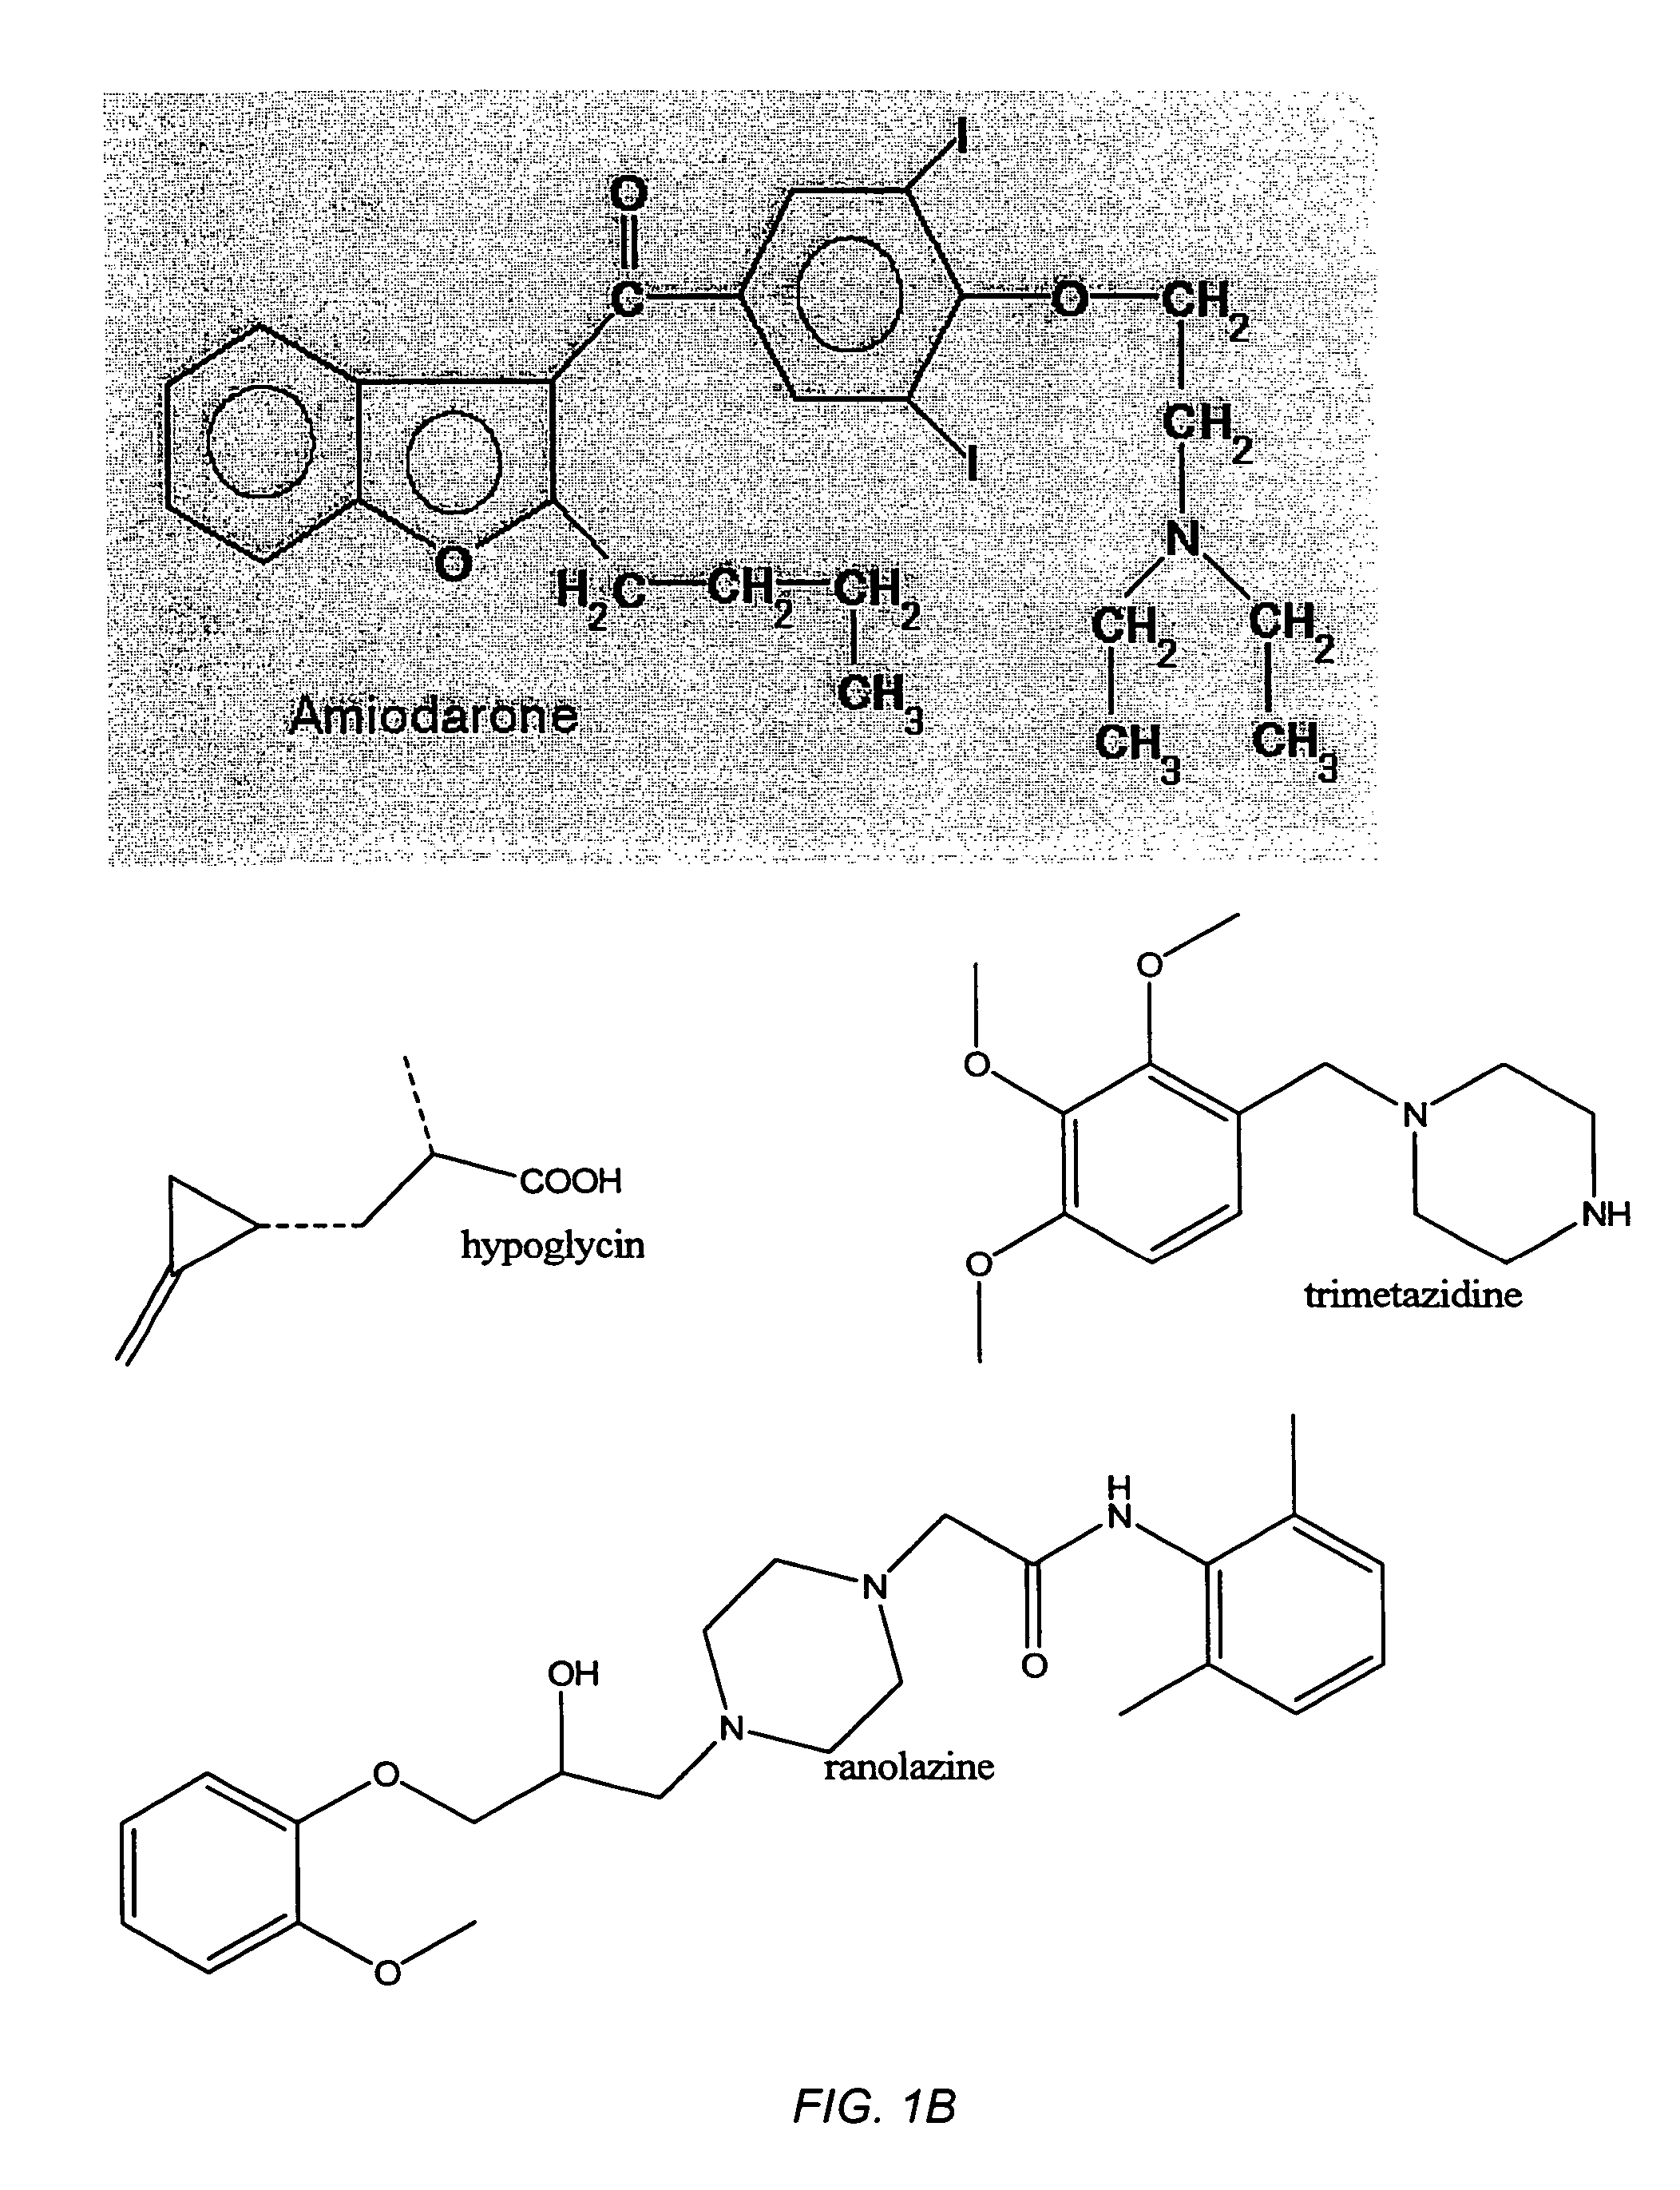 Compositions of UCP inhibitors, Fas antibody, a fatty acid metabolism inhibitor and/or a glucose metabolism inhibitor